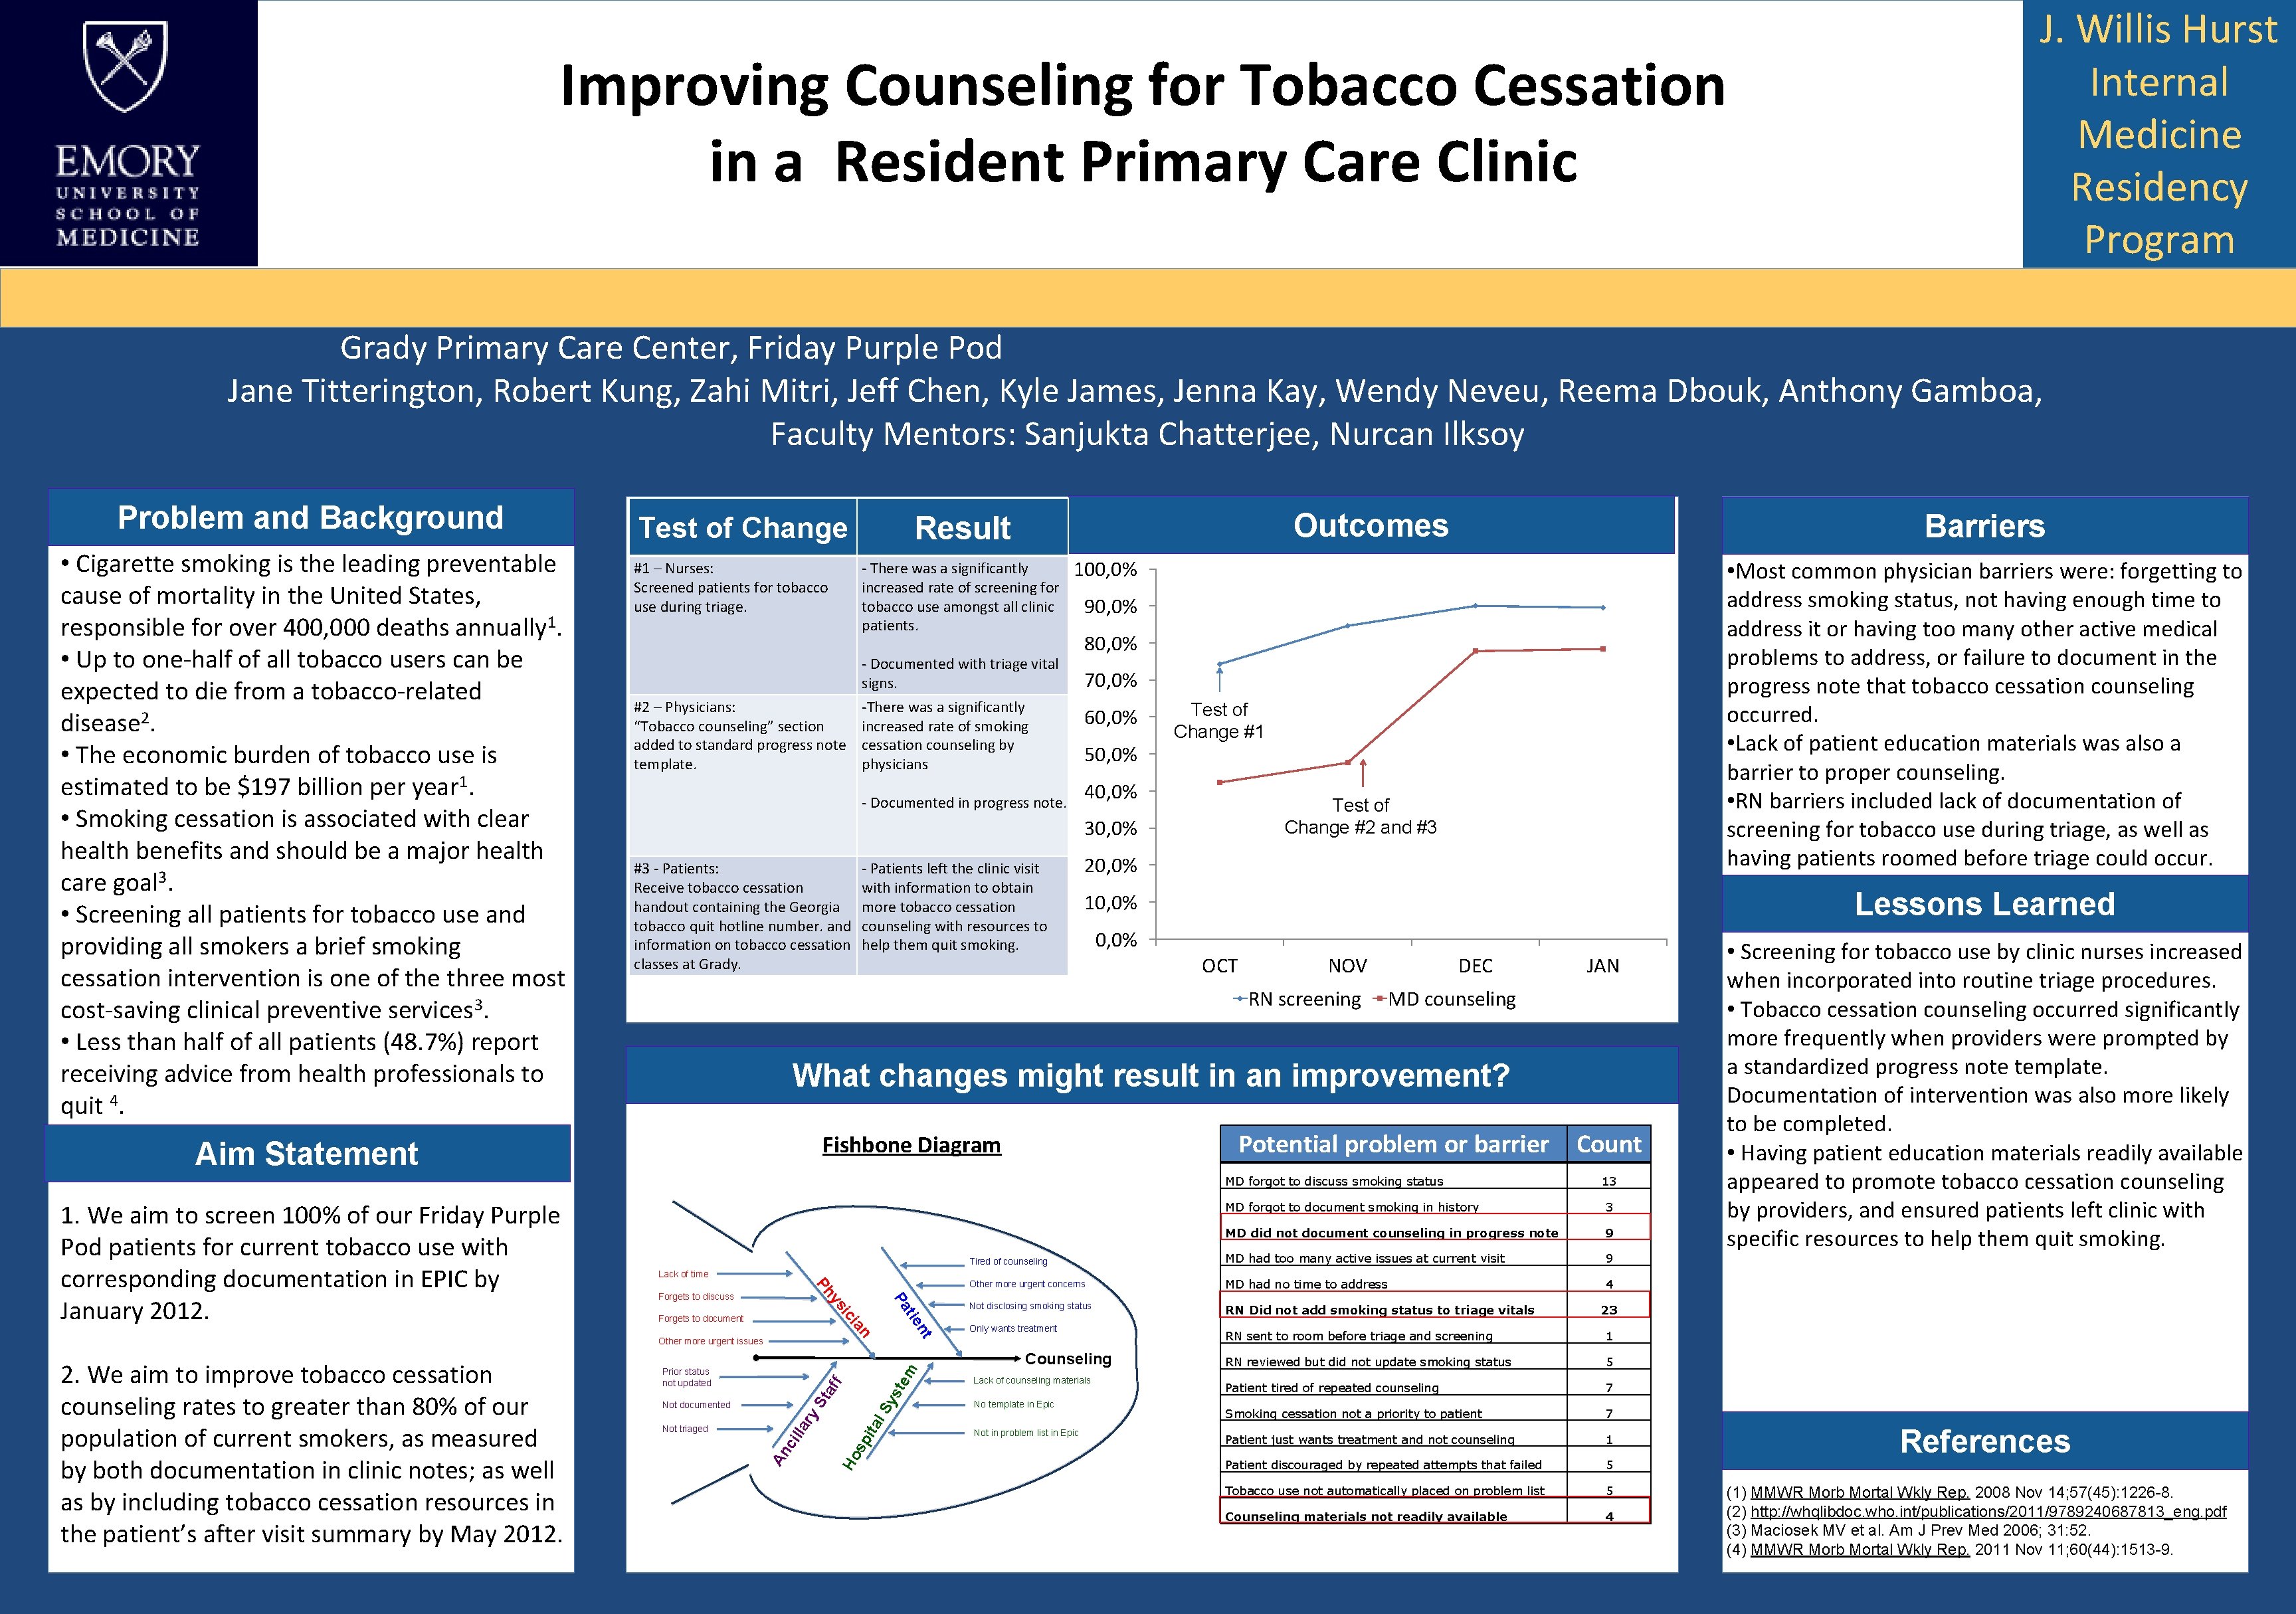 Improving Counseling for Tobacco Cessation in a Resident Primary Care Clinic J. Willis Hurst